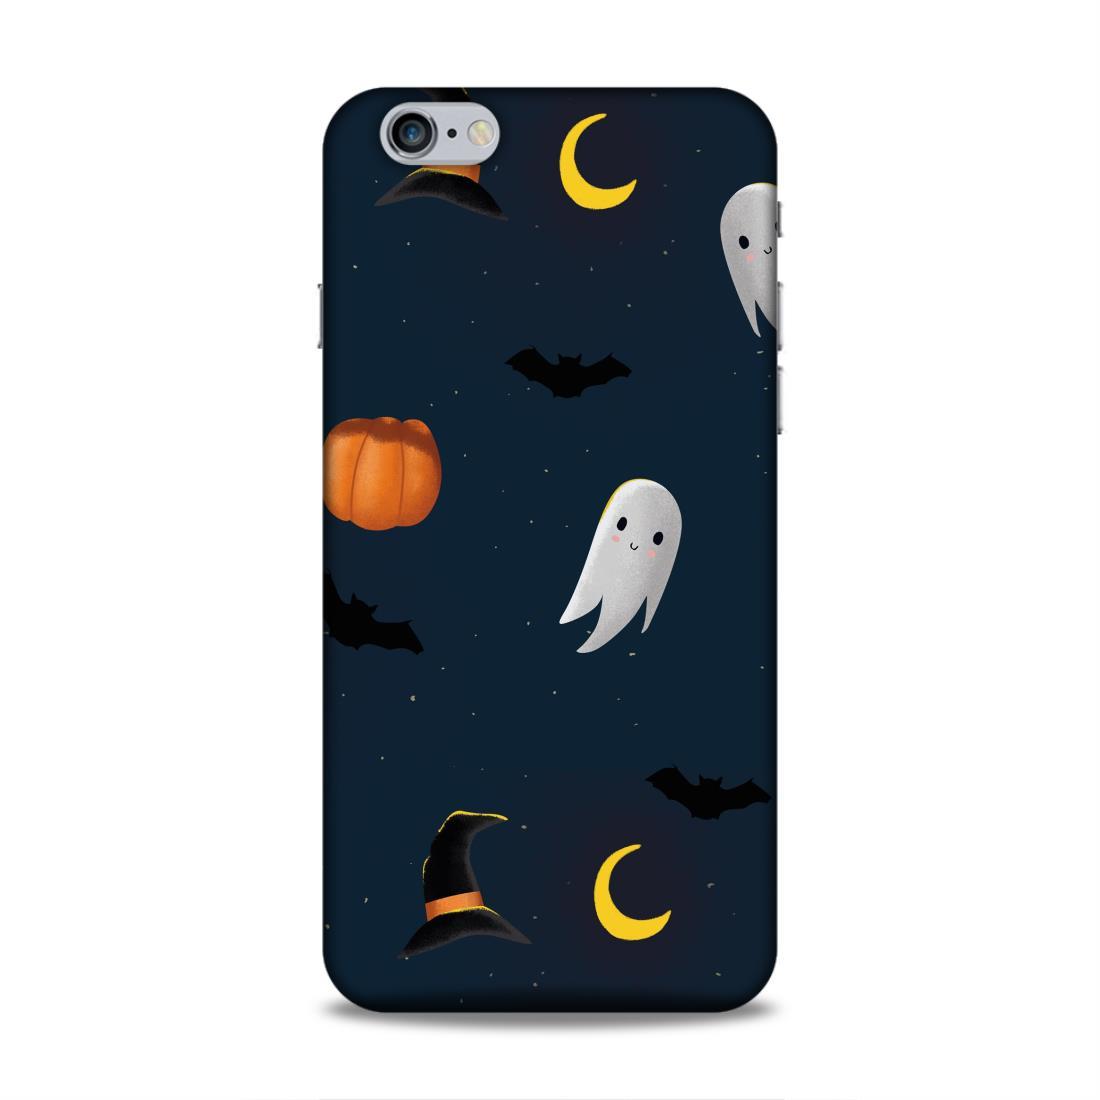 Cute Ghost iPhone 6 Plus Mobile Case Cover